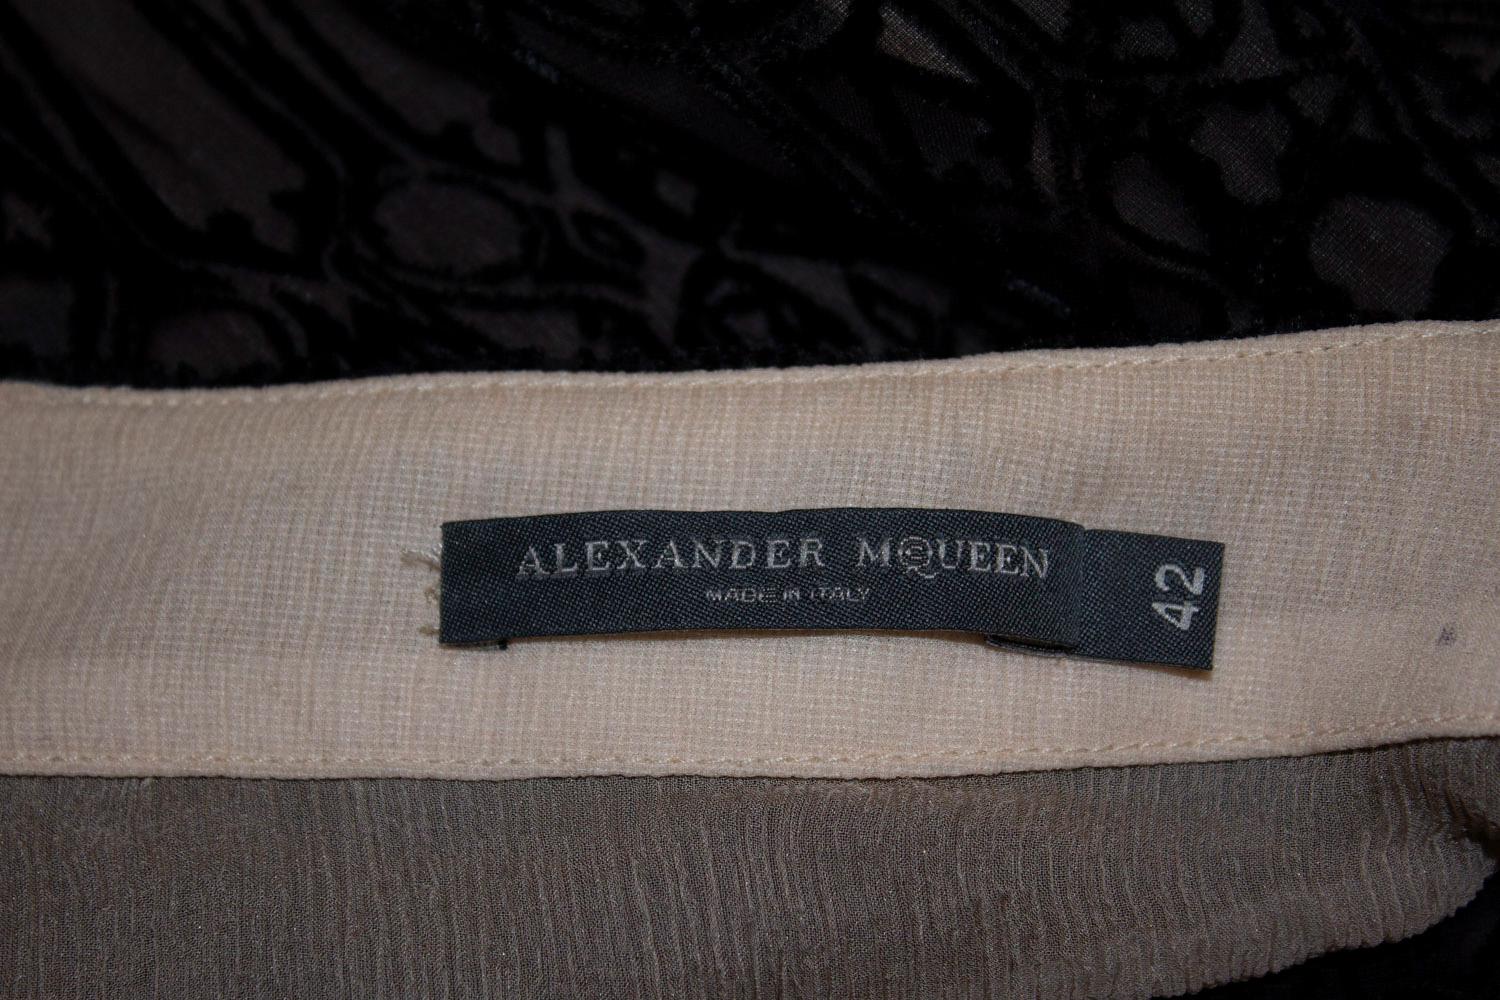 A stunning skirt  by Alexander Mc Queen mainline. The outer fabric is black devoree velvet, and the skirt is lined in  silk. It is a great design with a flared hem.  Made in Italy. Size 42
Measurements: Waist 31'', Length 32''.